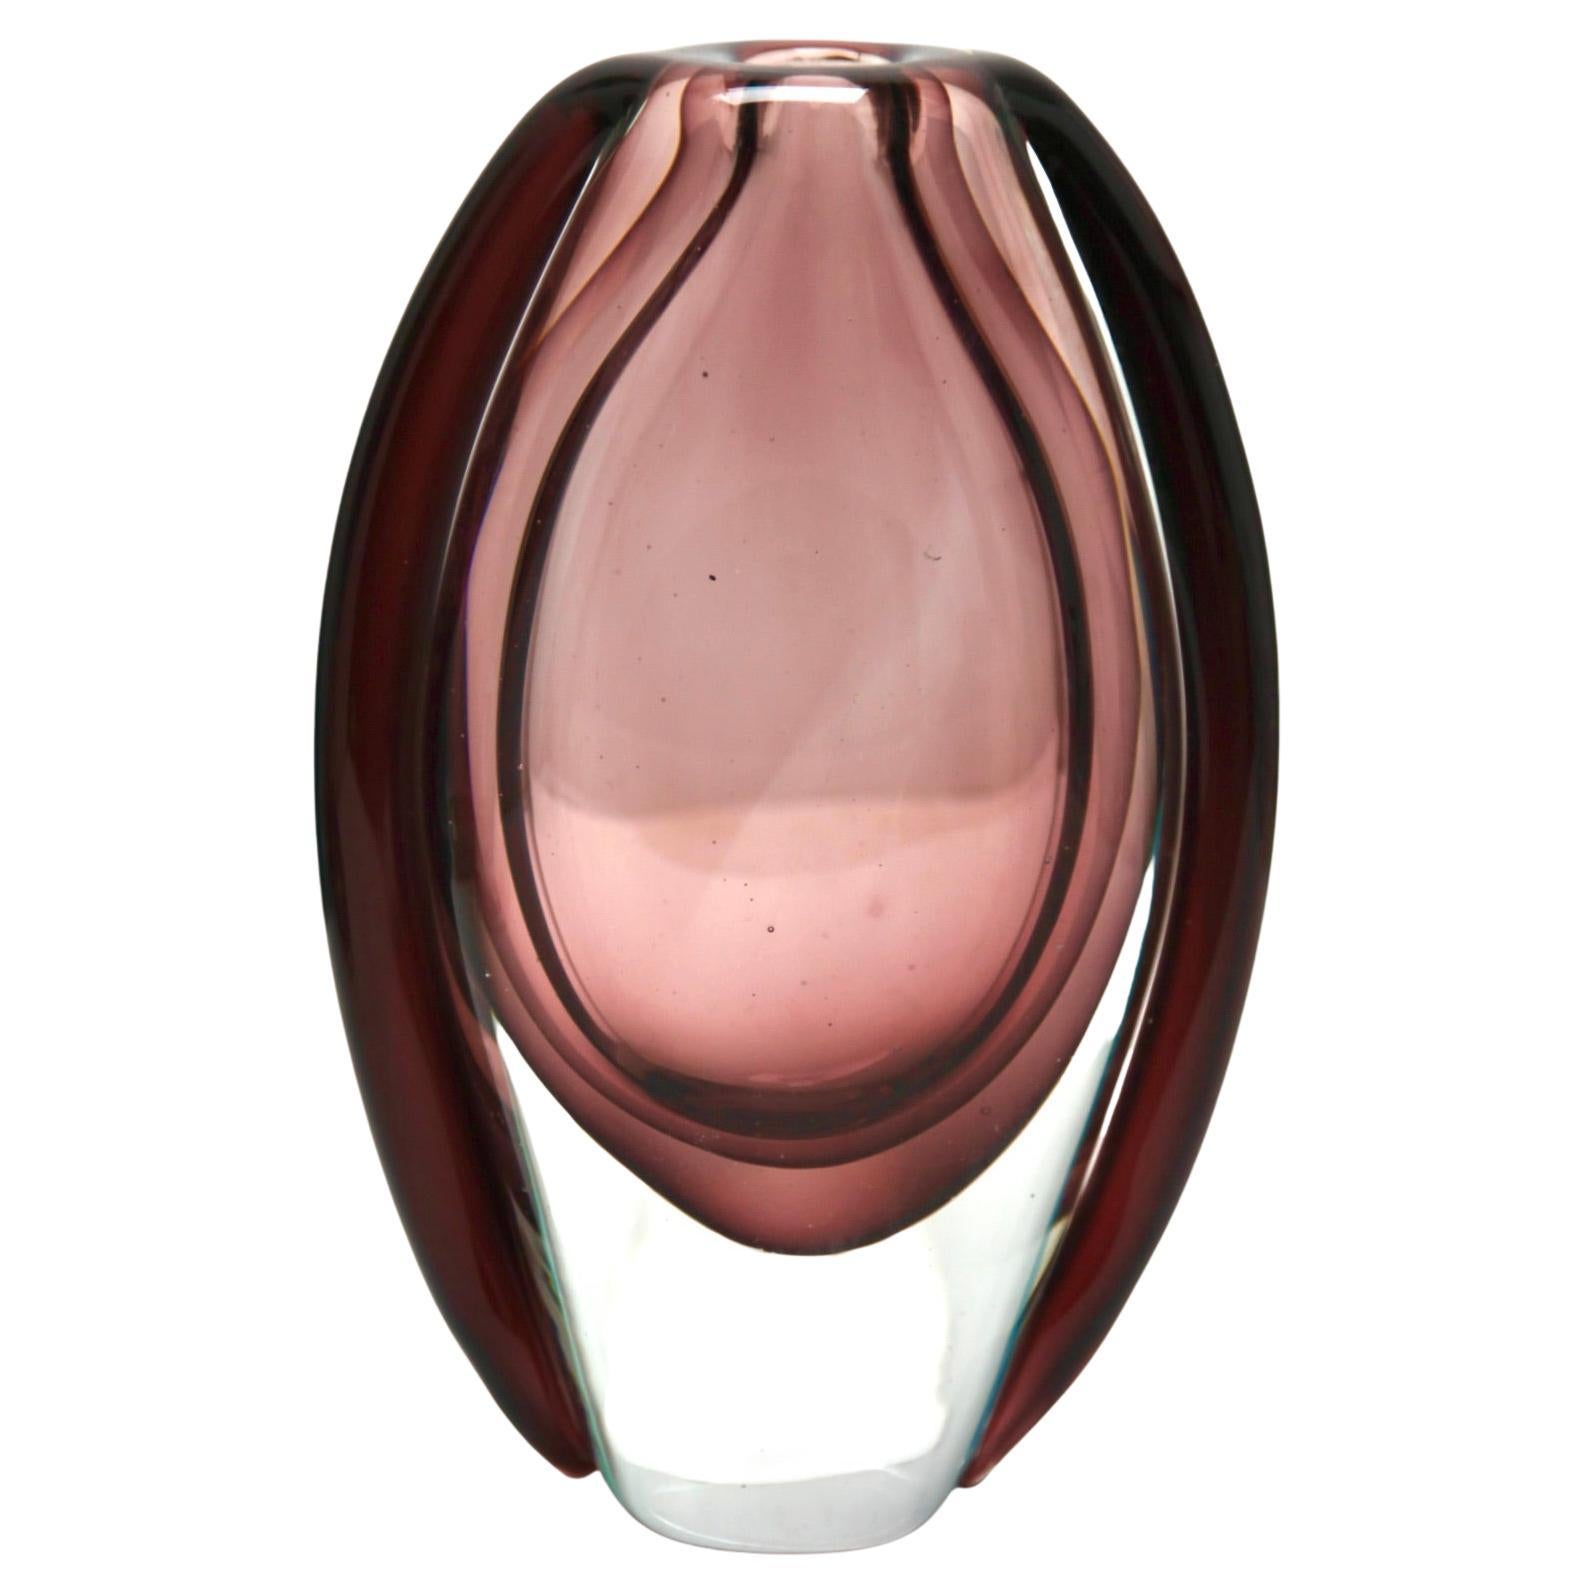 Murano-Tropfenvasen Whit a Thick Sommerso „Clear Glass Casing“